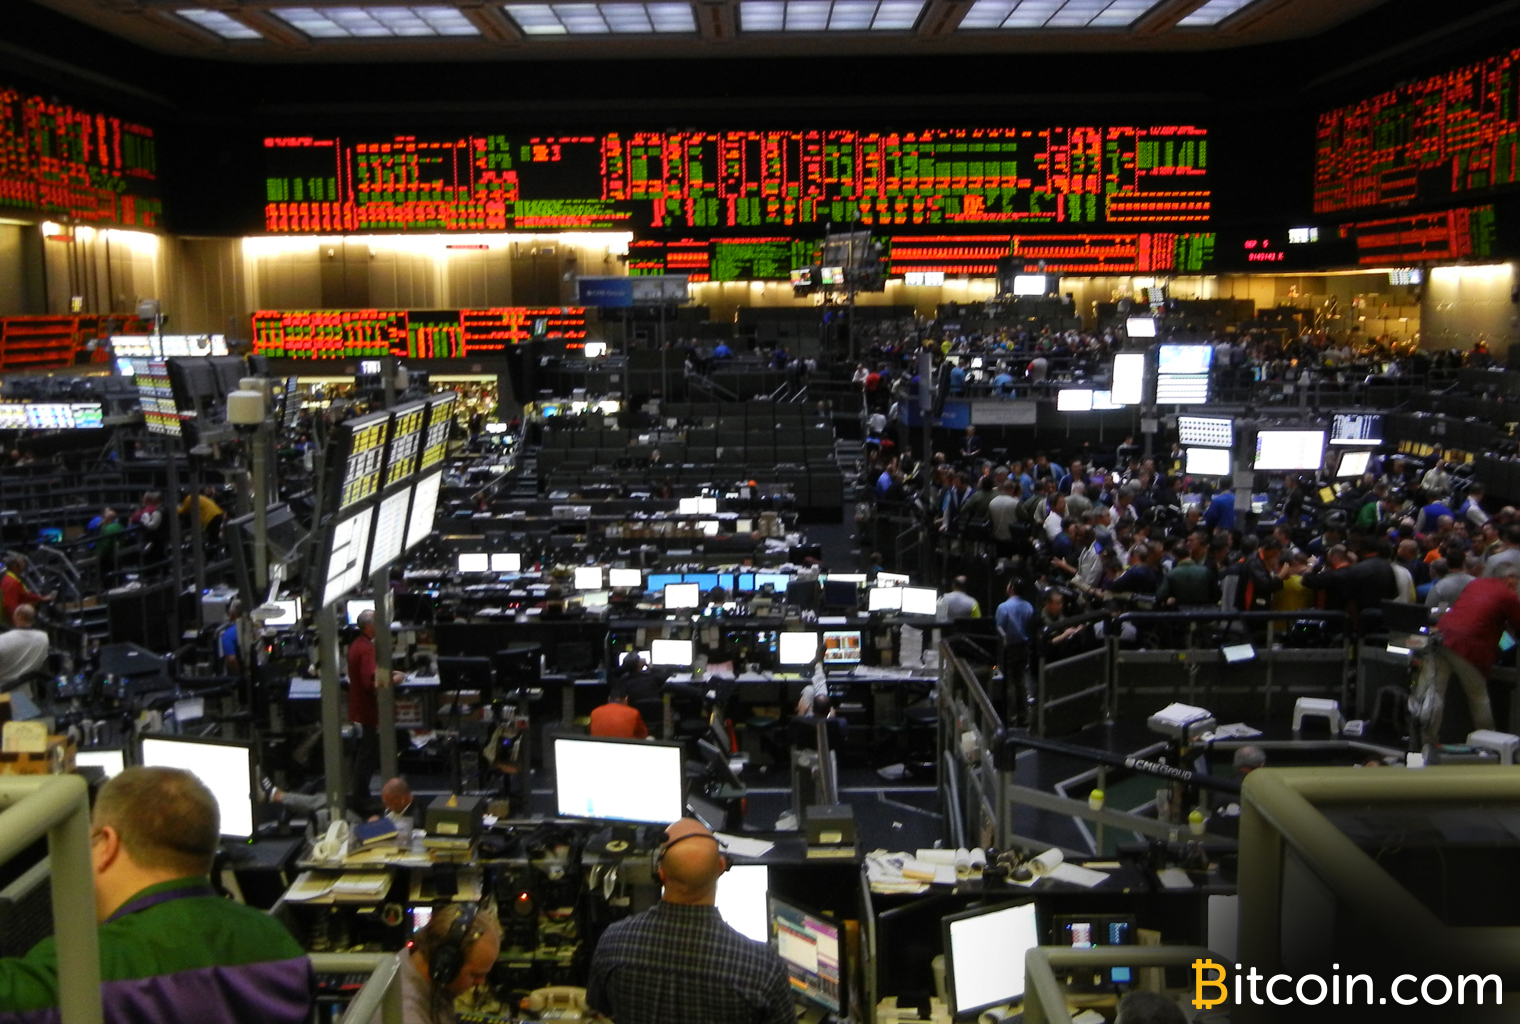 CME Group's Bitcoin Futures Breaks Records With $1 Billion in Notional Volume